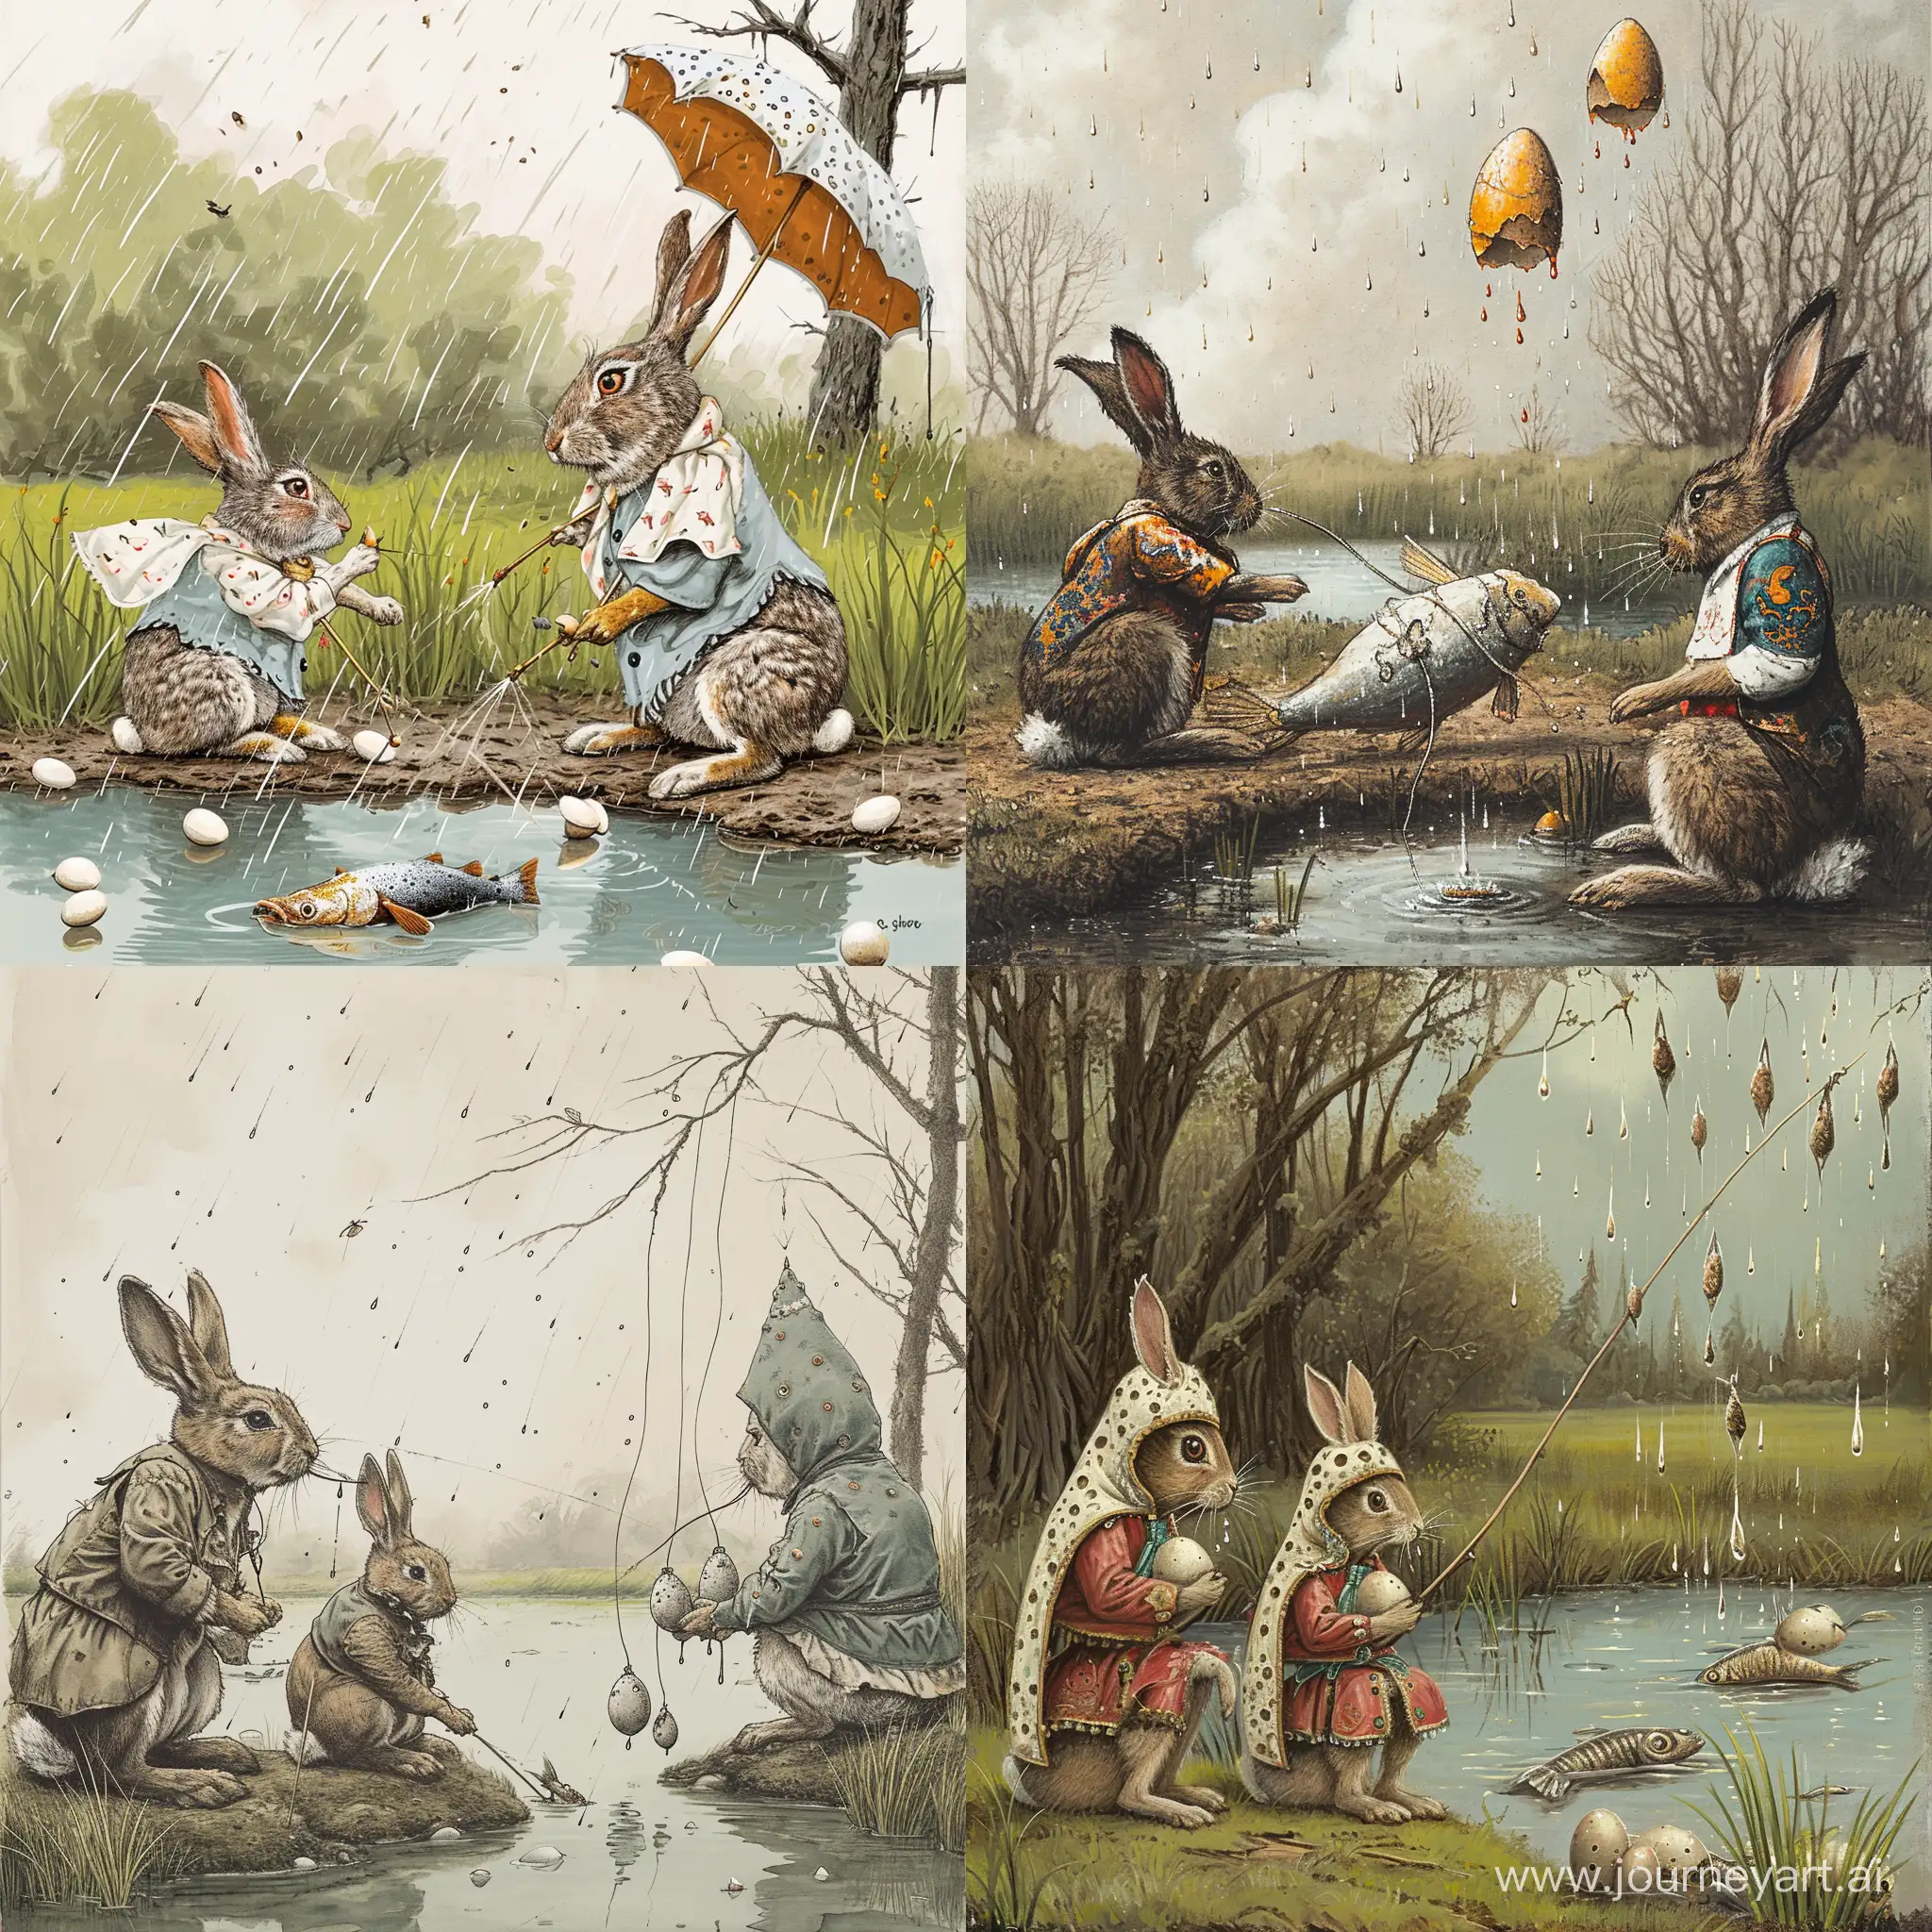 Rabbits-Catching-Anchovies-by-the-Pond-in-Unique-Costumes-Under-Egg-Rain